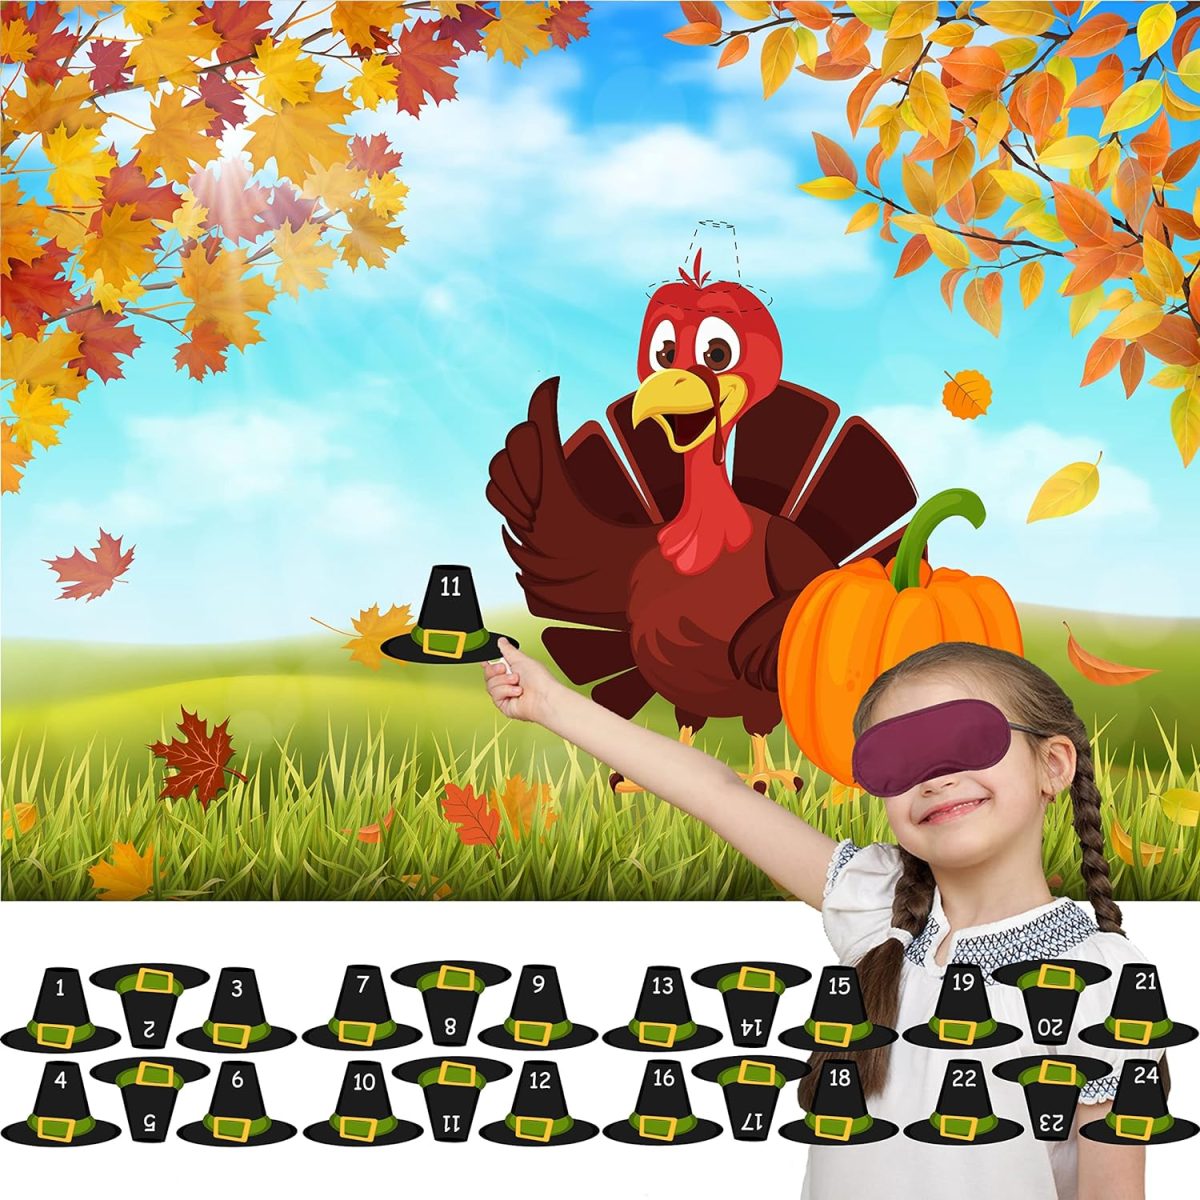 Image shows a picture of a turkey with Thanksgiving decorations and a young girl blindfolded playing Pin the hat on the turkey. 